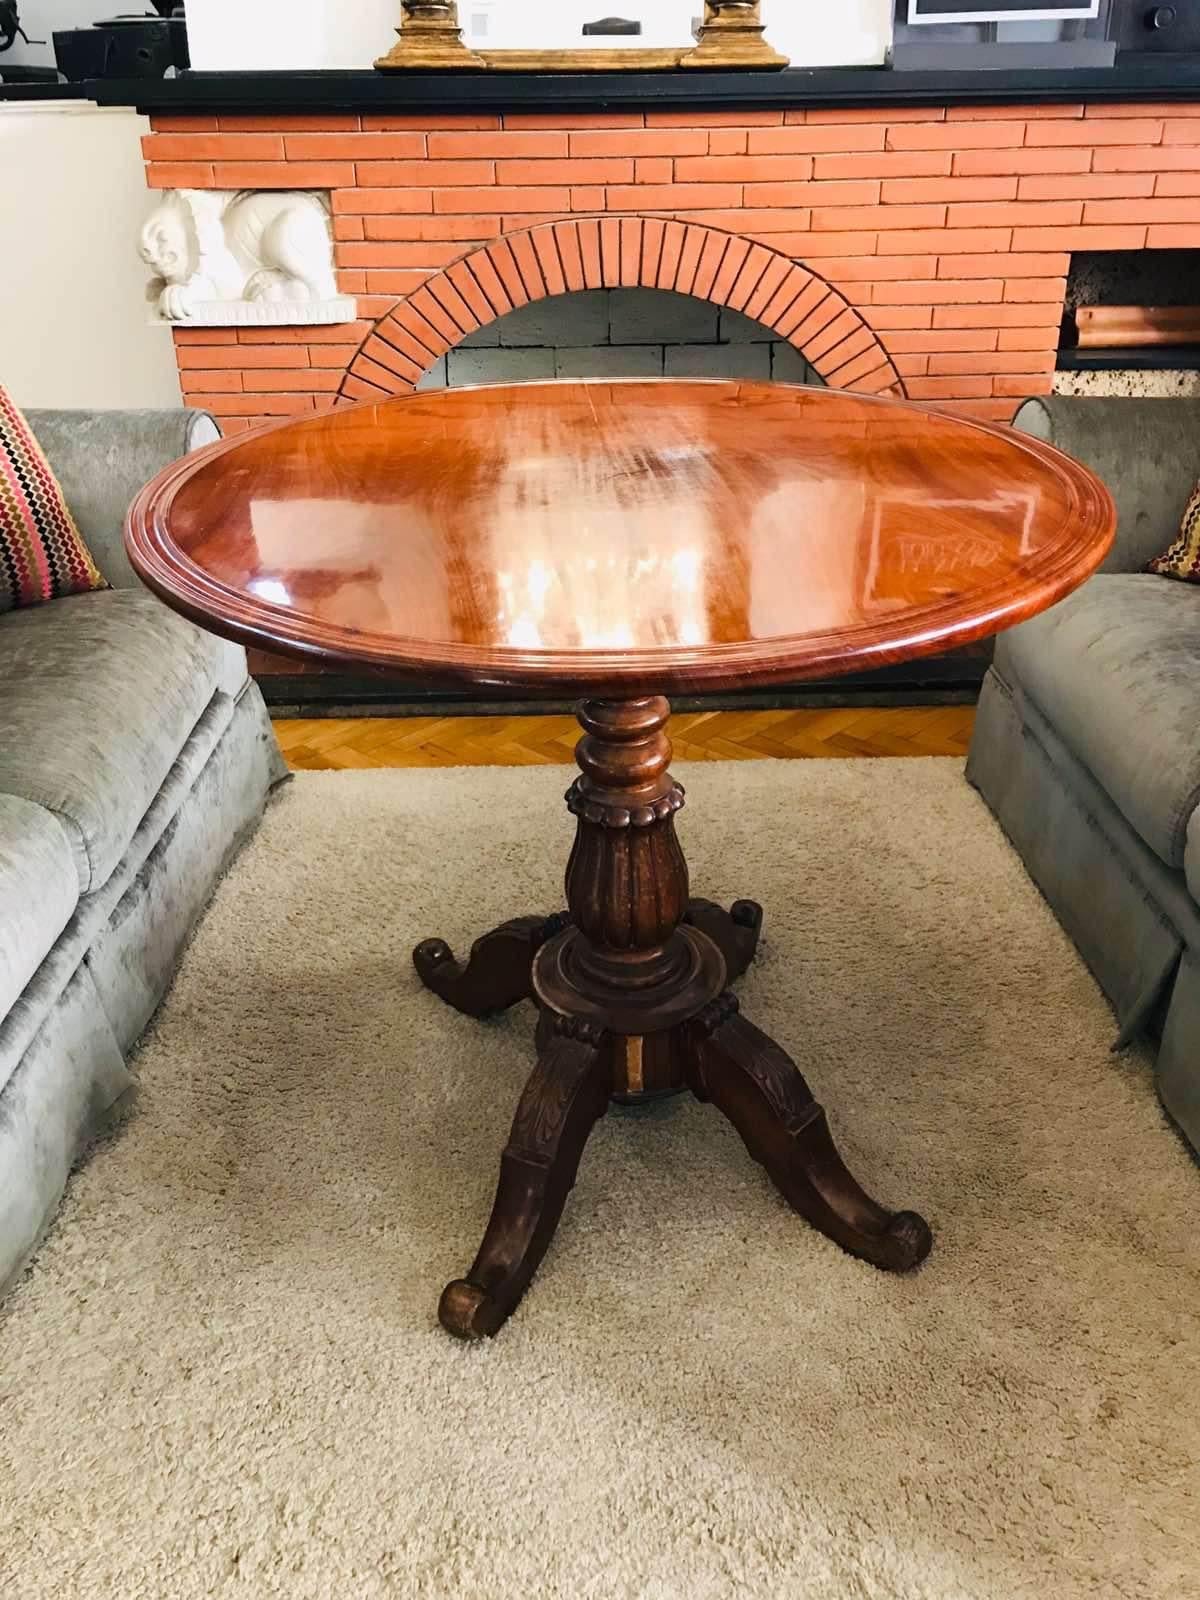 Impressive French mahogany pedestal table in oval shape raised on beautifully hand carved leg. Could be an elegant part of any type of interior.
Very good condition.
France, circa 1920.